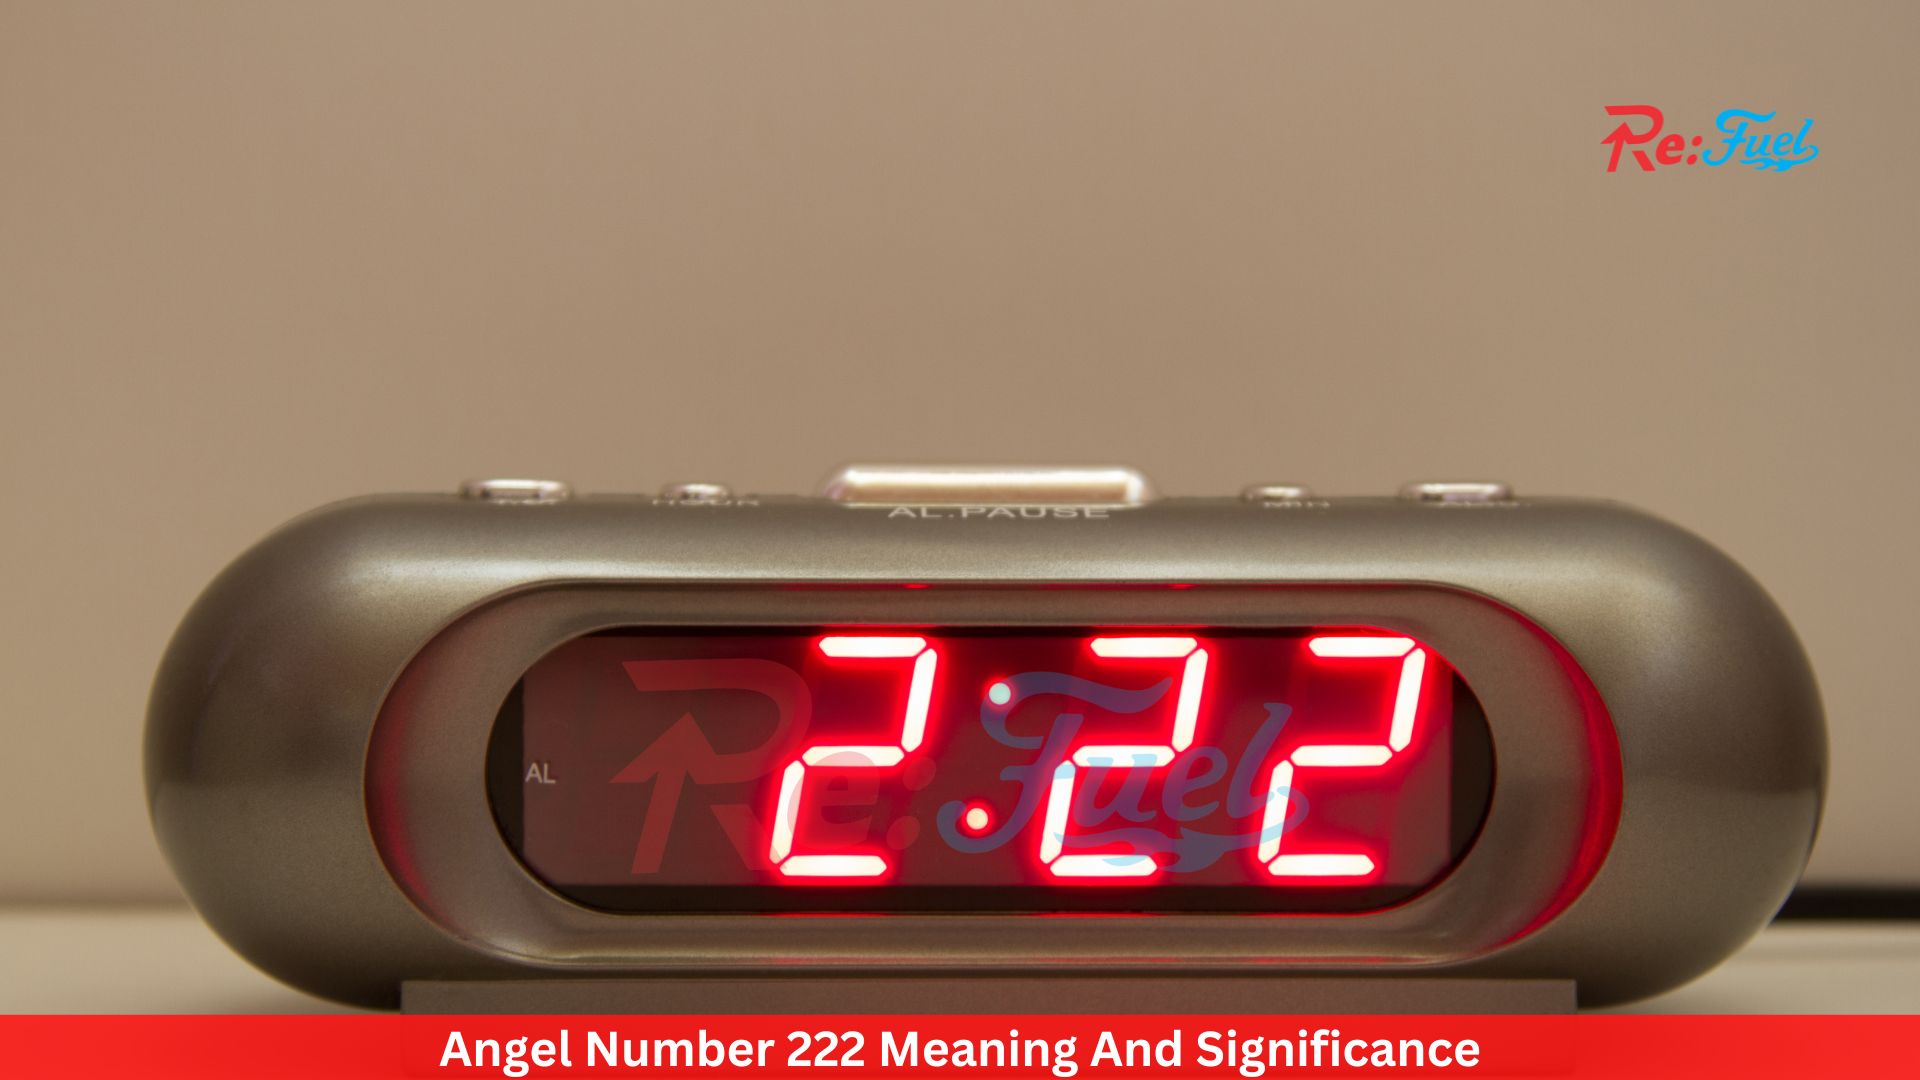 Angel Number 222 Meaning And Significance